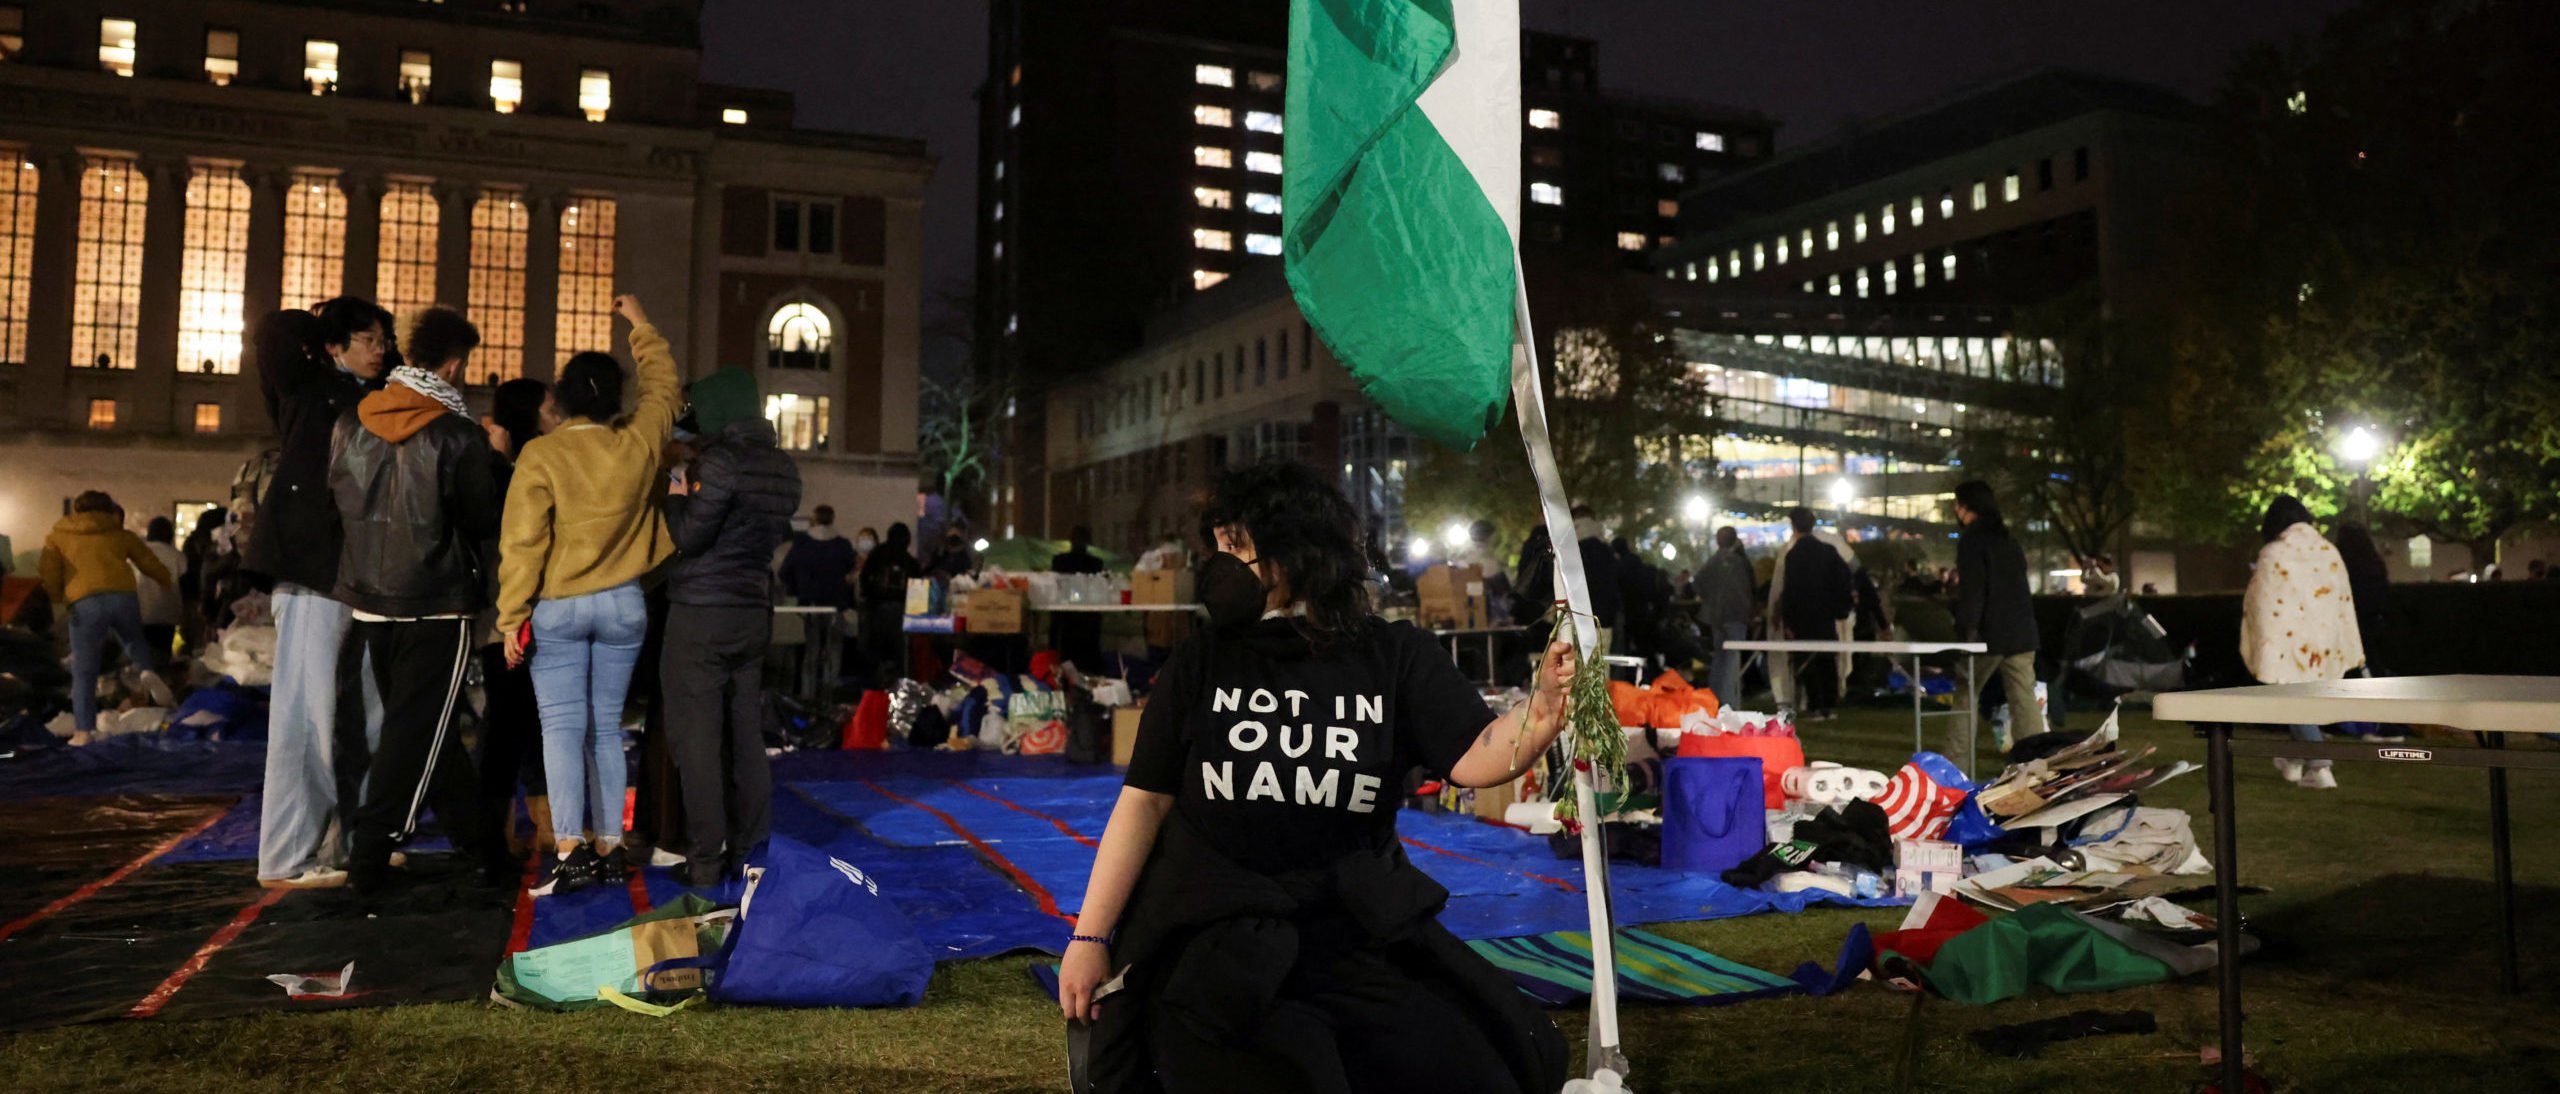 A student fixes a Palestinian flag as student protesters bring tents and supplies back into the protest encampment in support of Palestinians after a midnight deadline for protesters to leave the encampment on campus passed and it was reported to have been extended to 8 a.m., during the ongoing conflict between Israel and the Palestinian Islamist group Hamas, in New York City, U.S., April 23, 2024, REUTERS/Caitlin Ochs